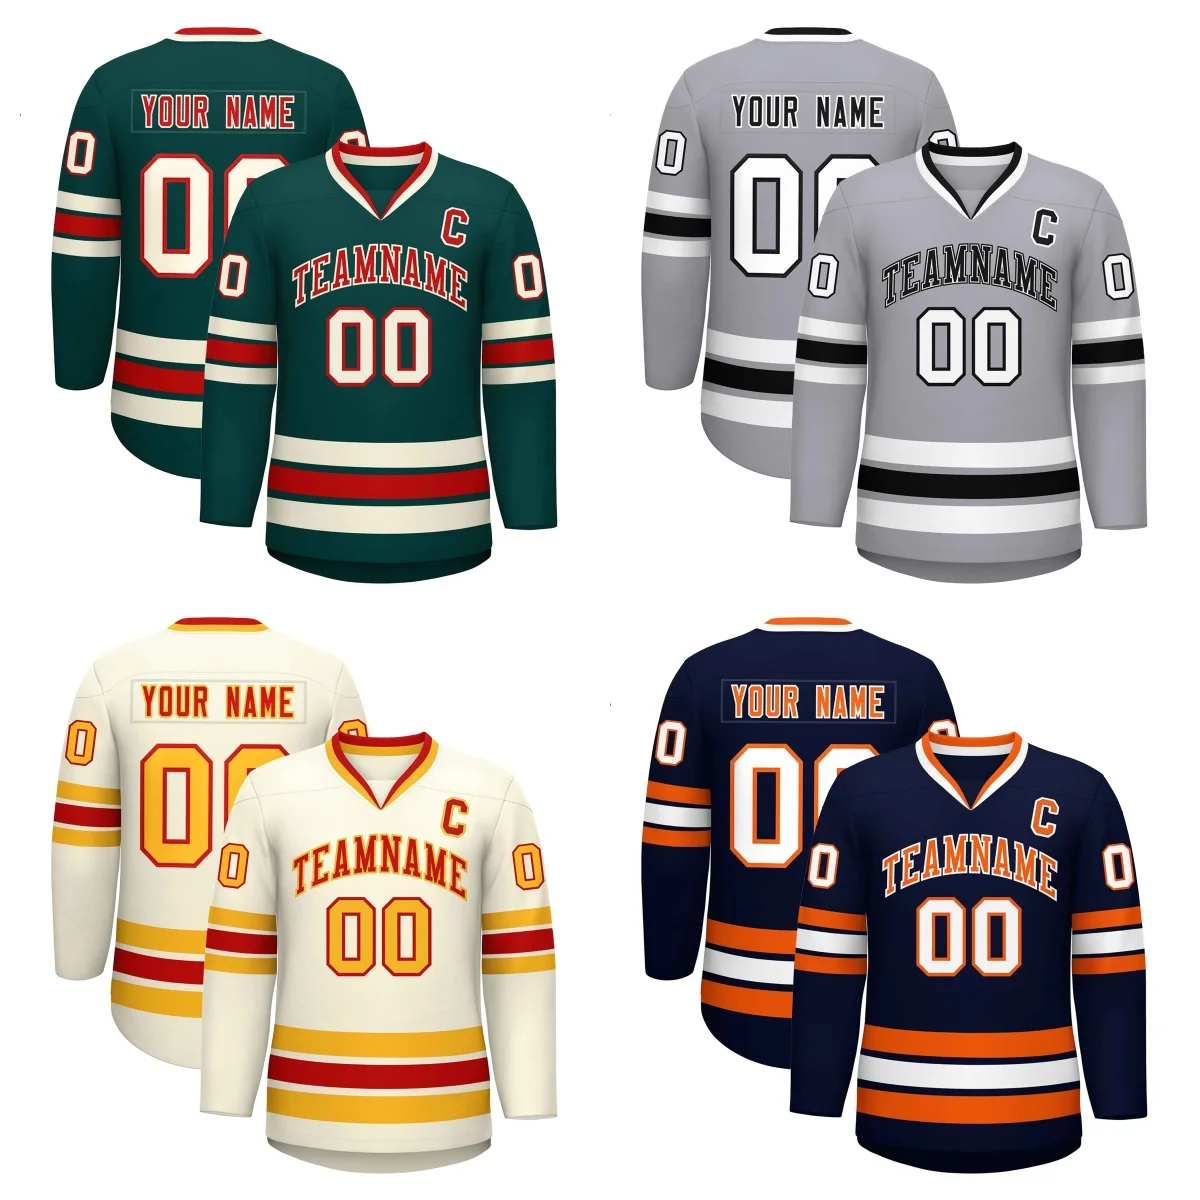 

Customized New Fashion Hockey Jersey Printed Team Name & Number for Men/Youth Practice Jerseys